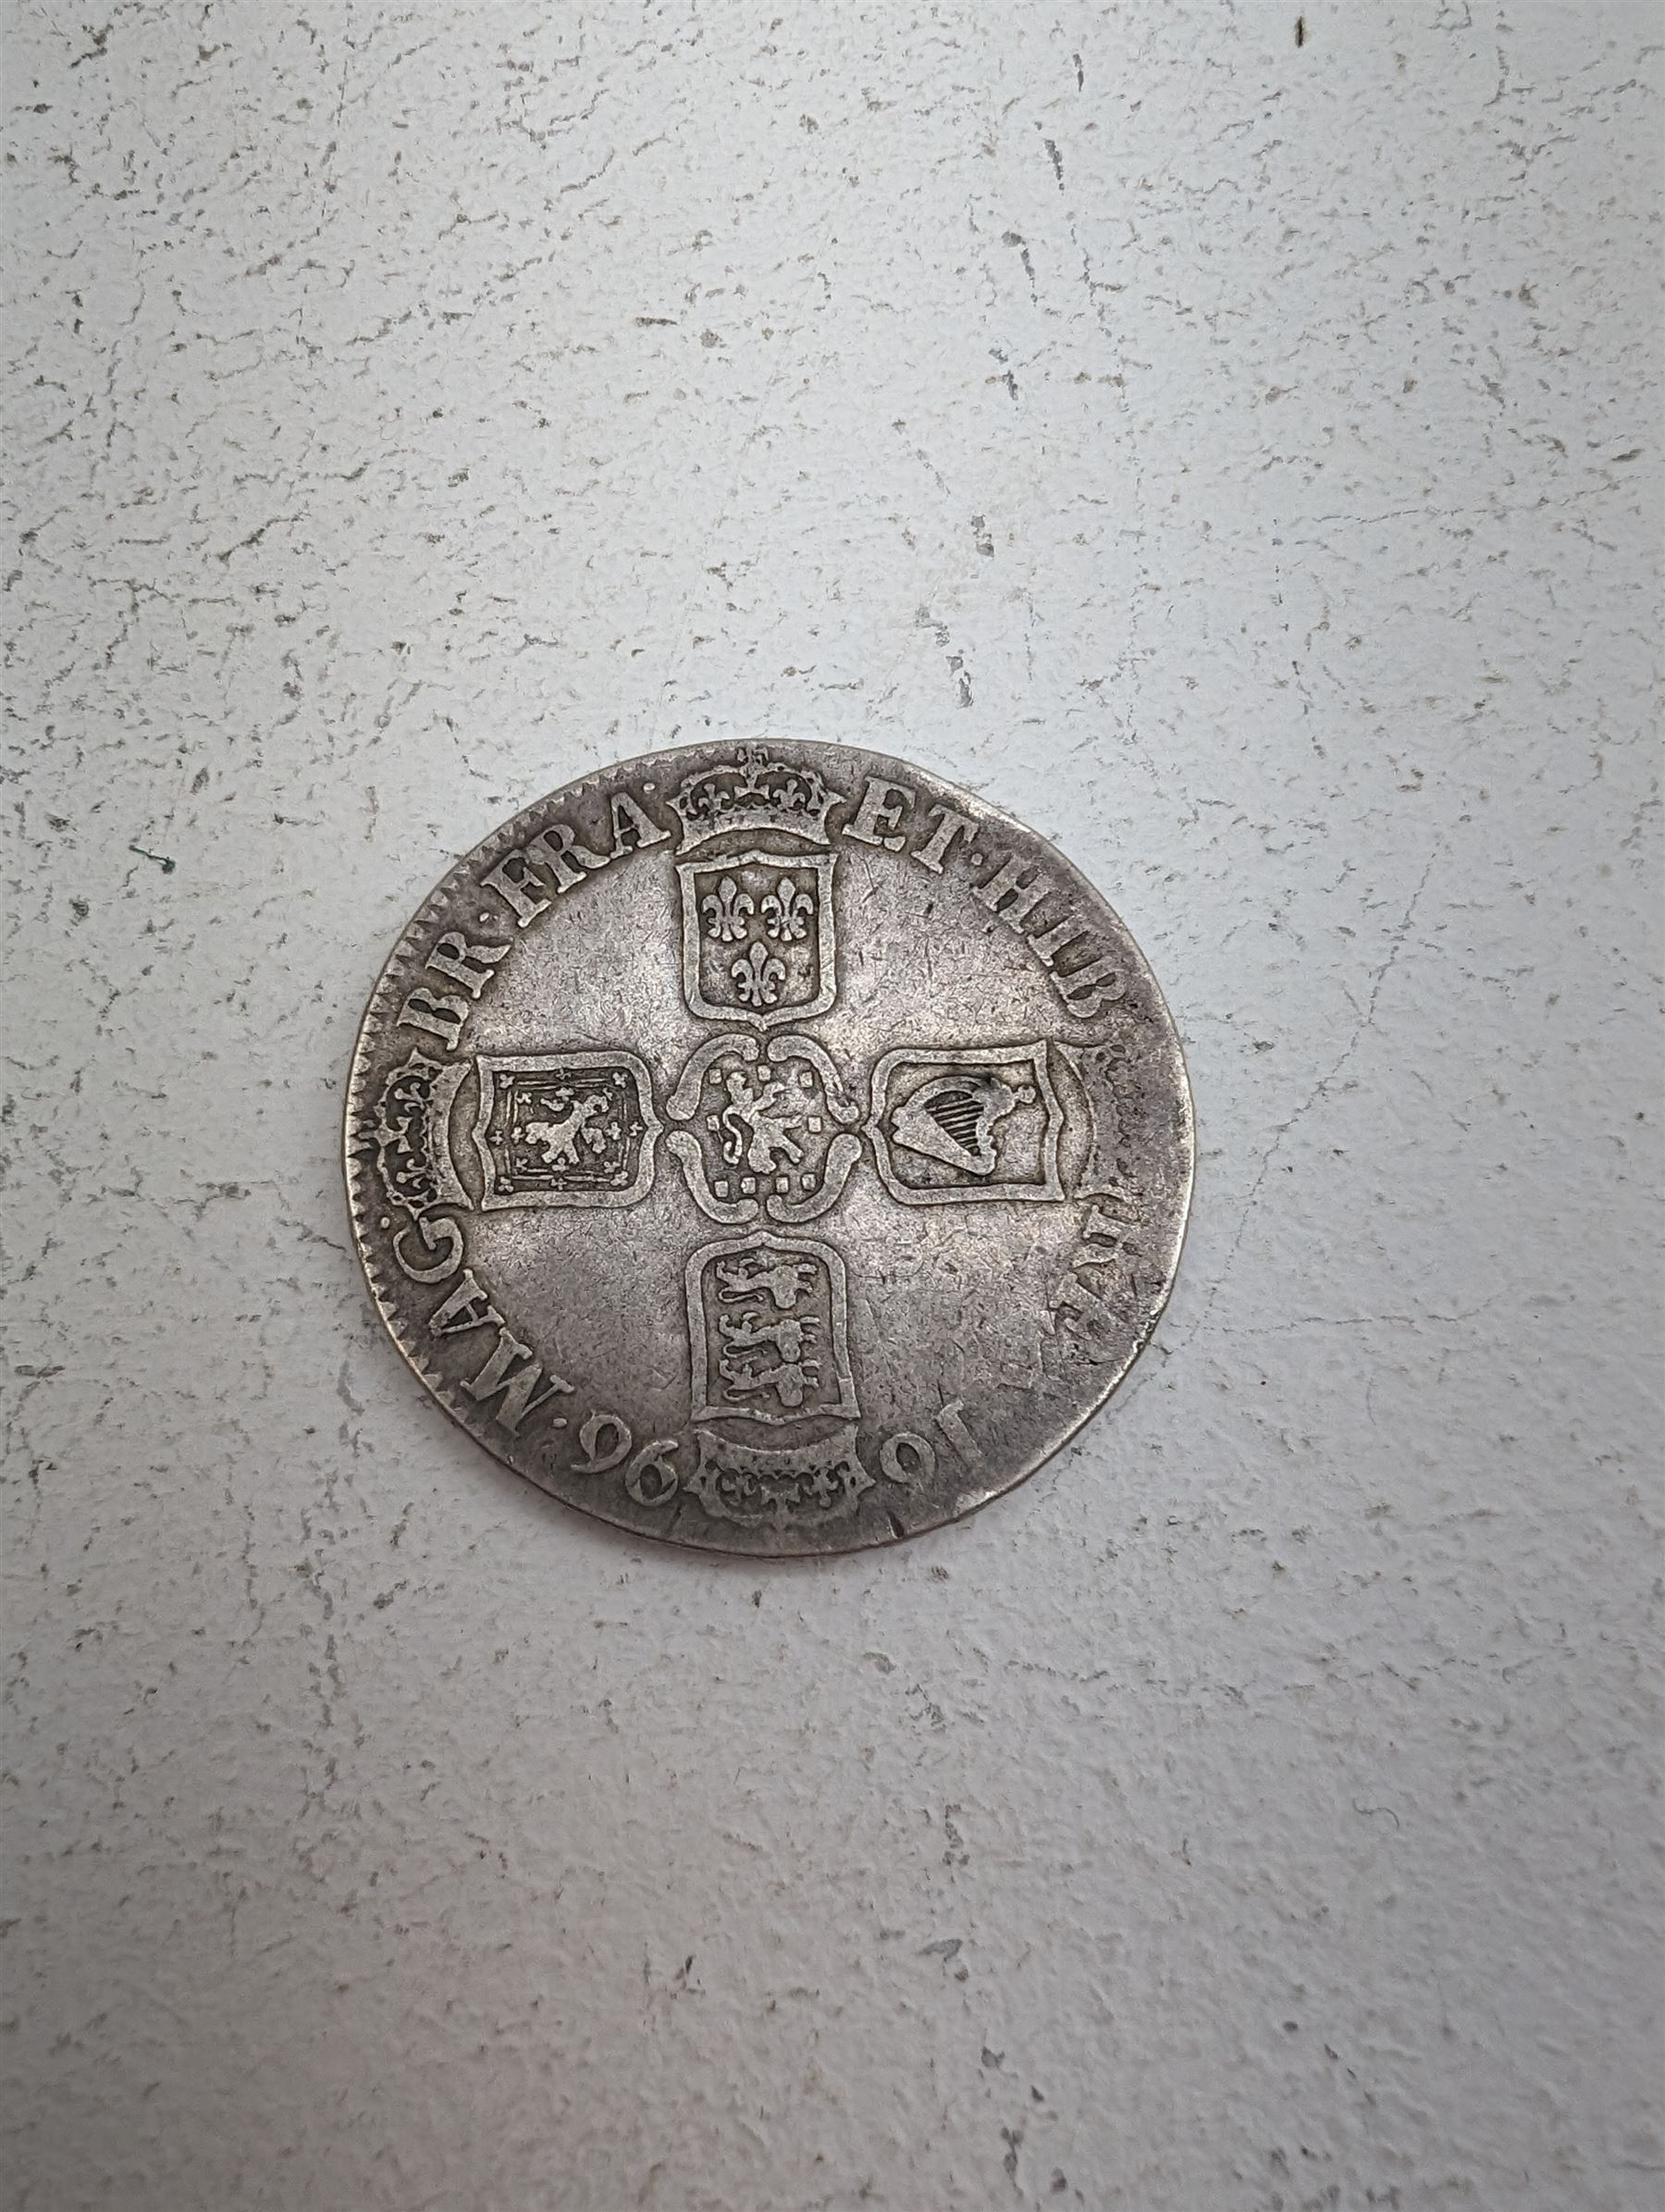 William III 1696 silver crown coin - Image 2 of 2